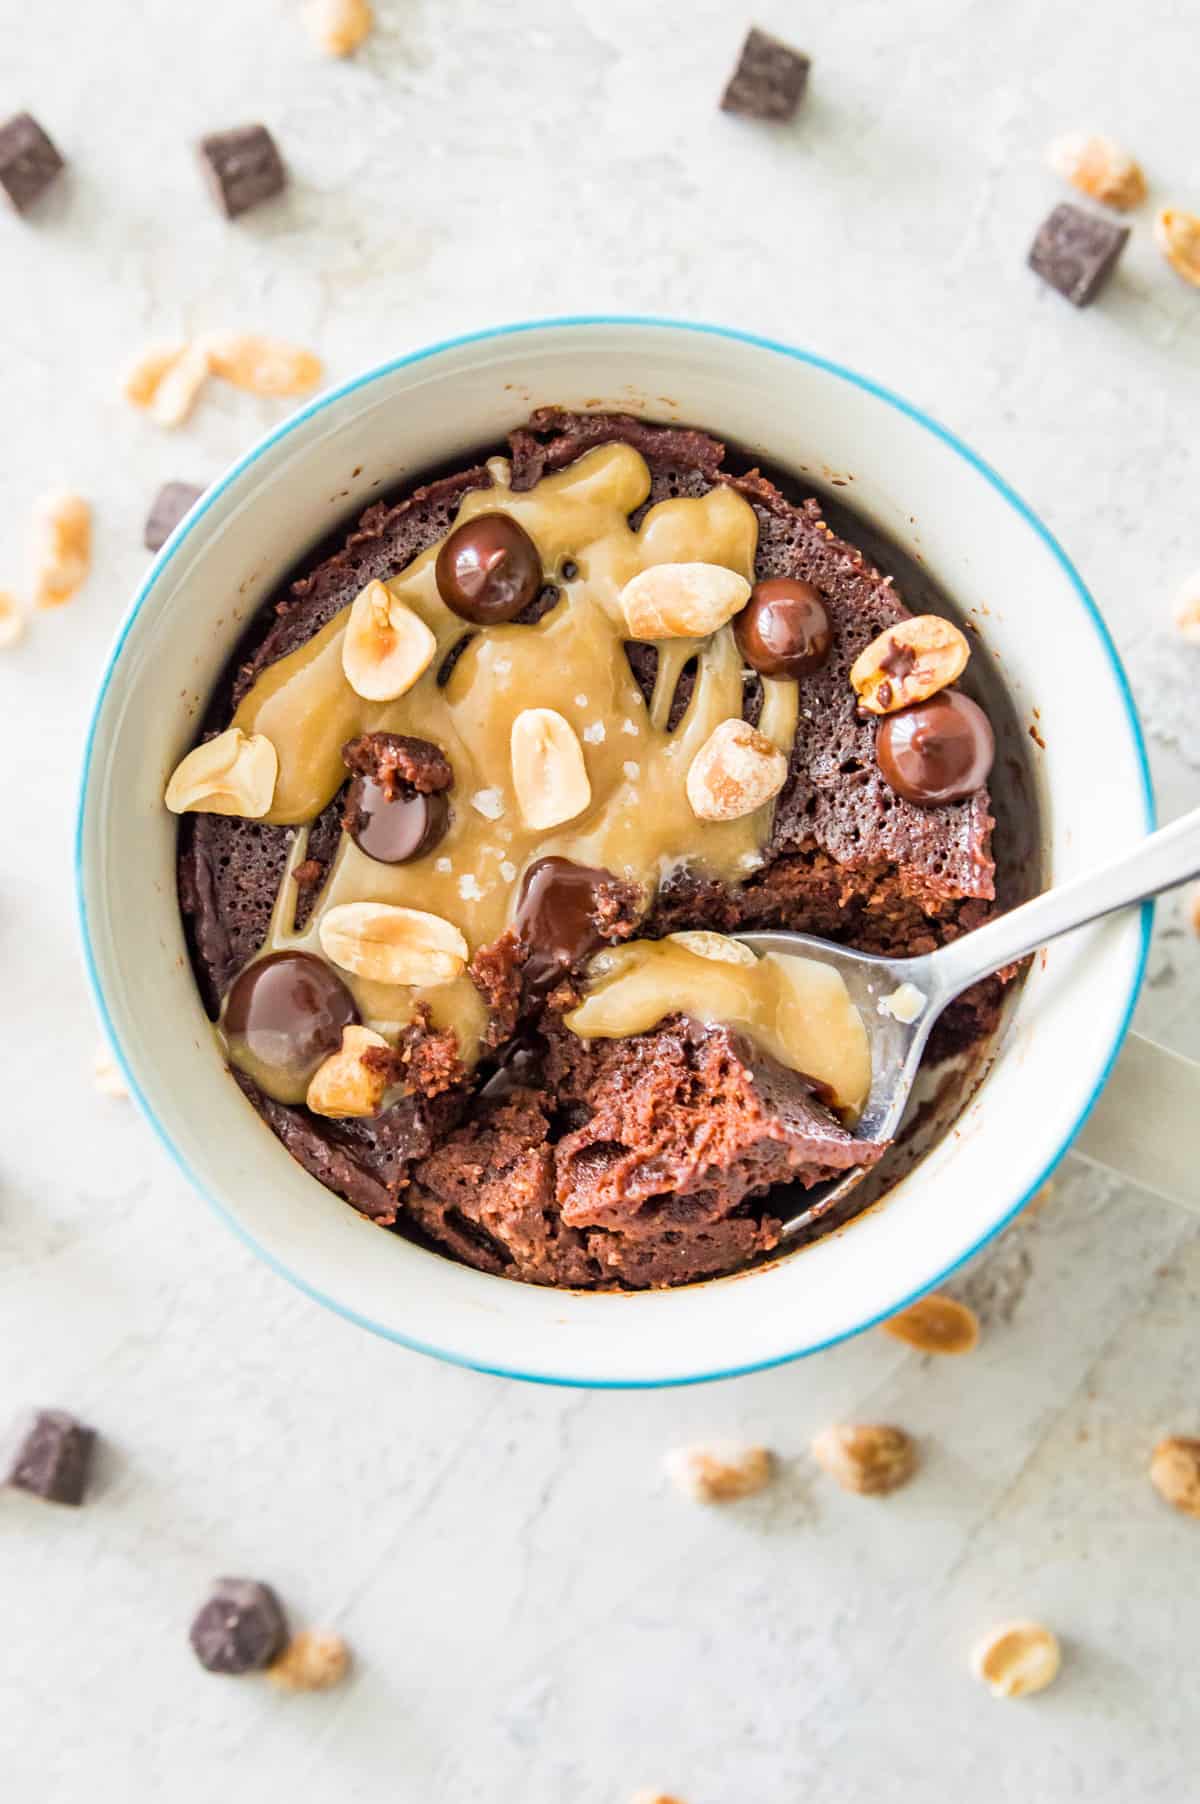 A chocolate mug cake topped with caramel sauce, peanuts and chocolate chips with a spoon taking a piece out of it.